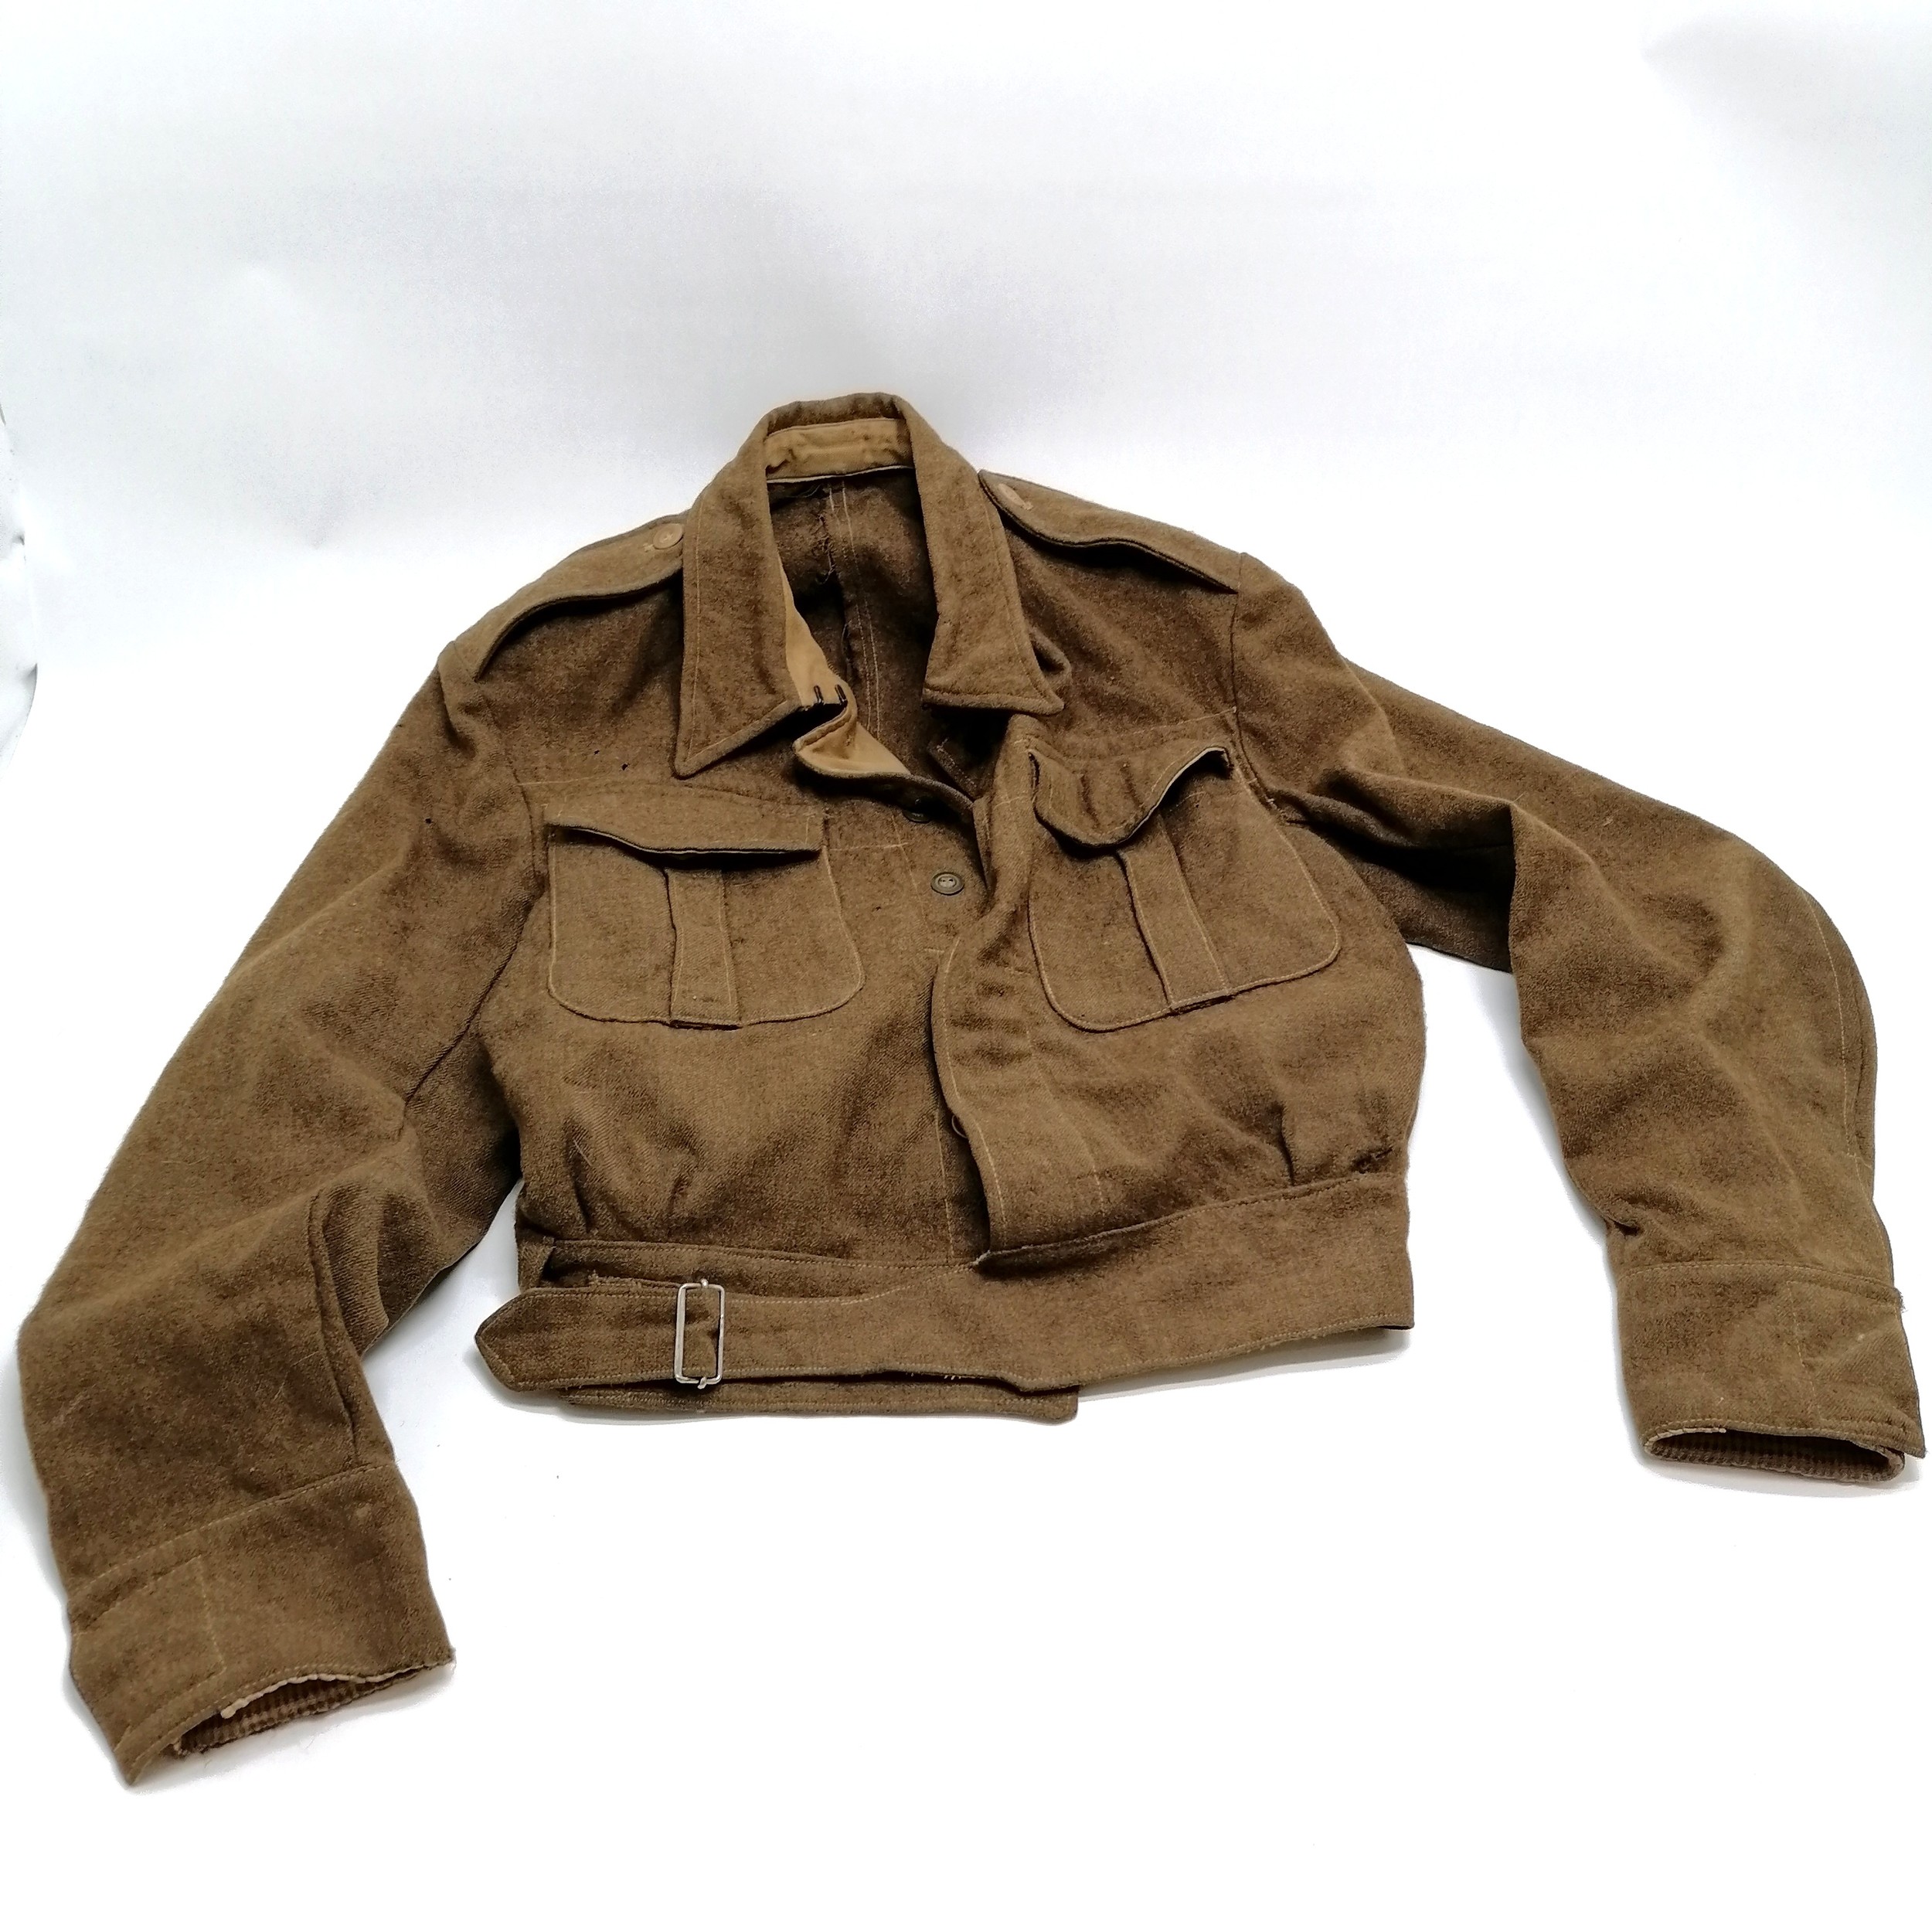 WWII (1940 dated) battle dress blouse size No 11 ~ has some moth holes otherwise in good used